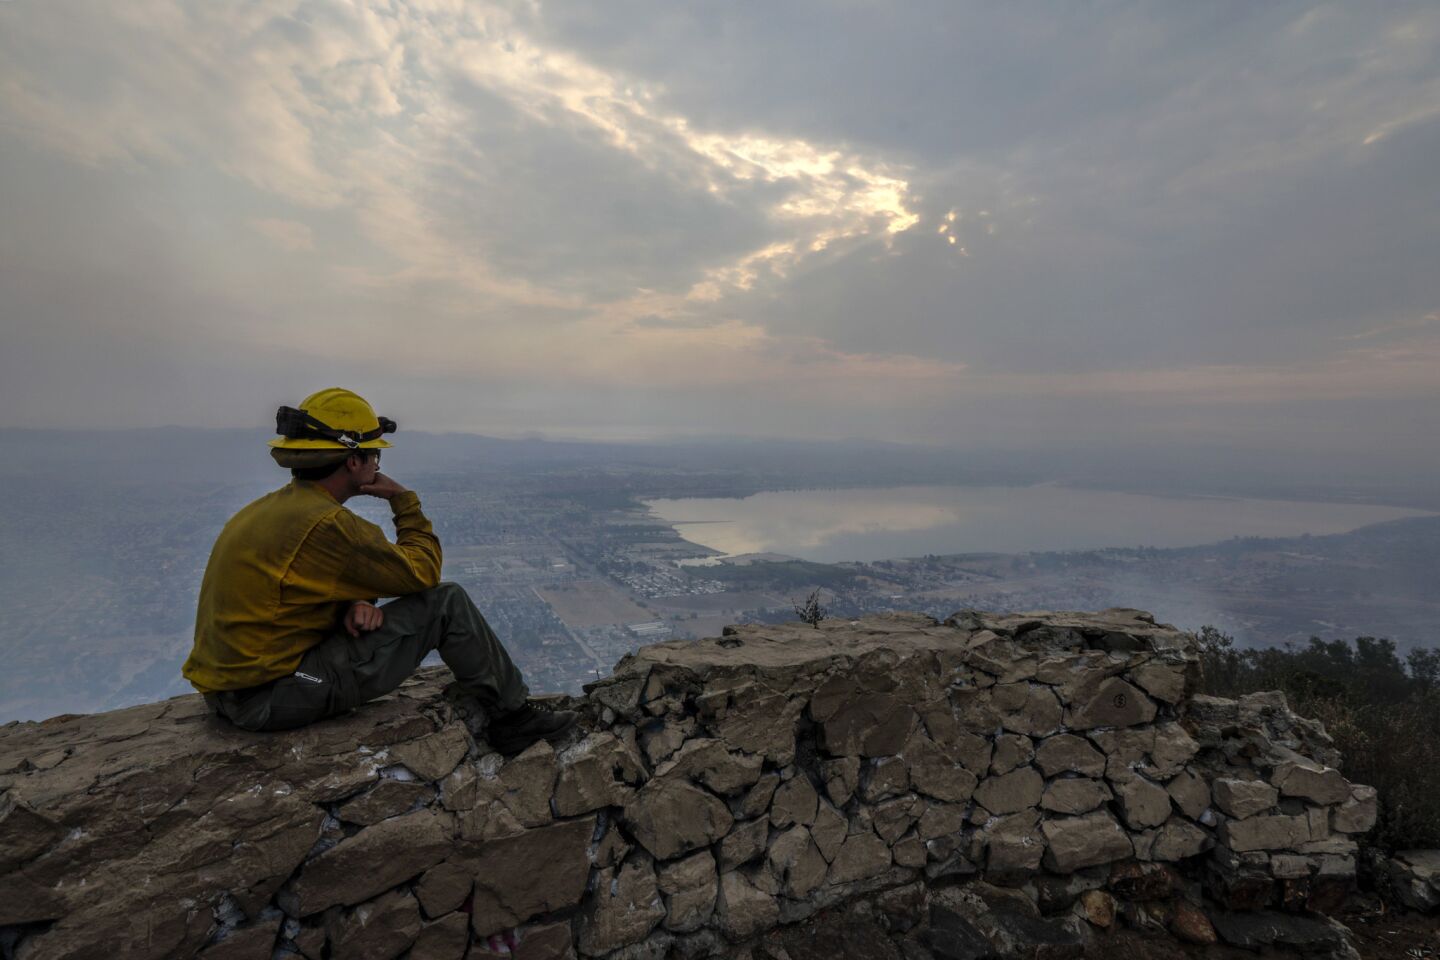 Firefighter Jon Polansky rest after working an overnight shift at a lookout on Ortega Highway above Lake Elsinore.